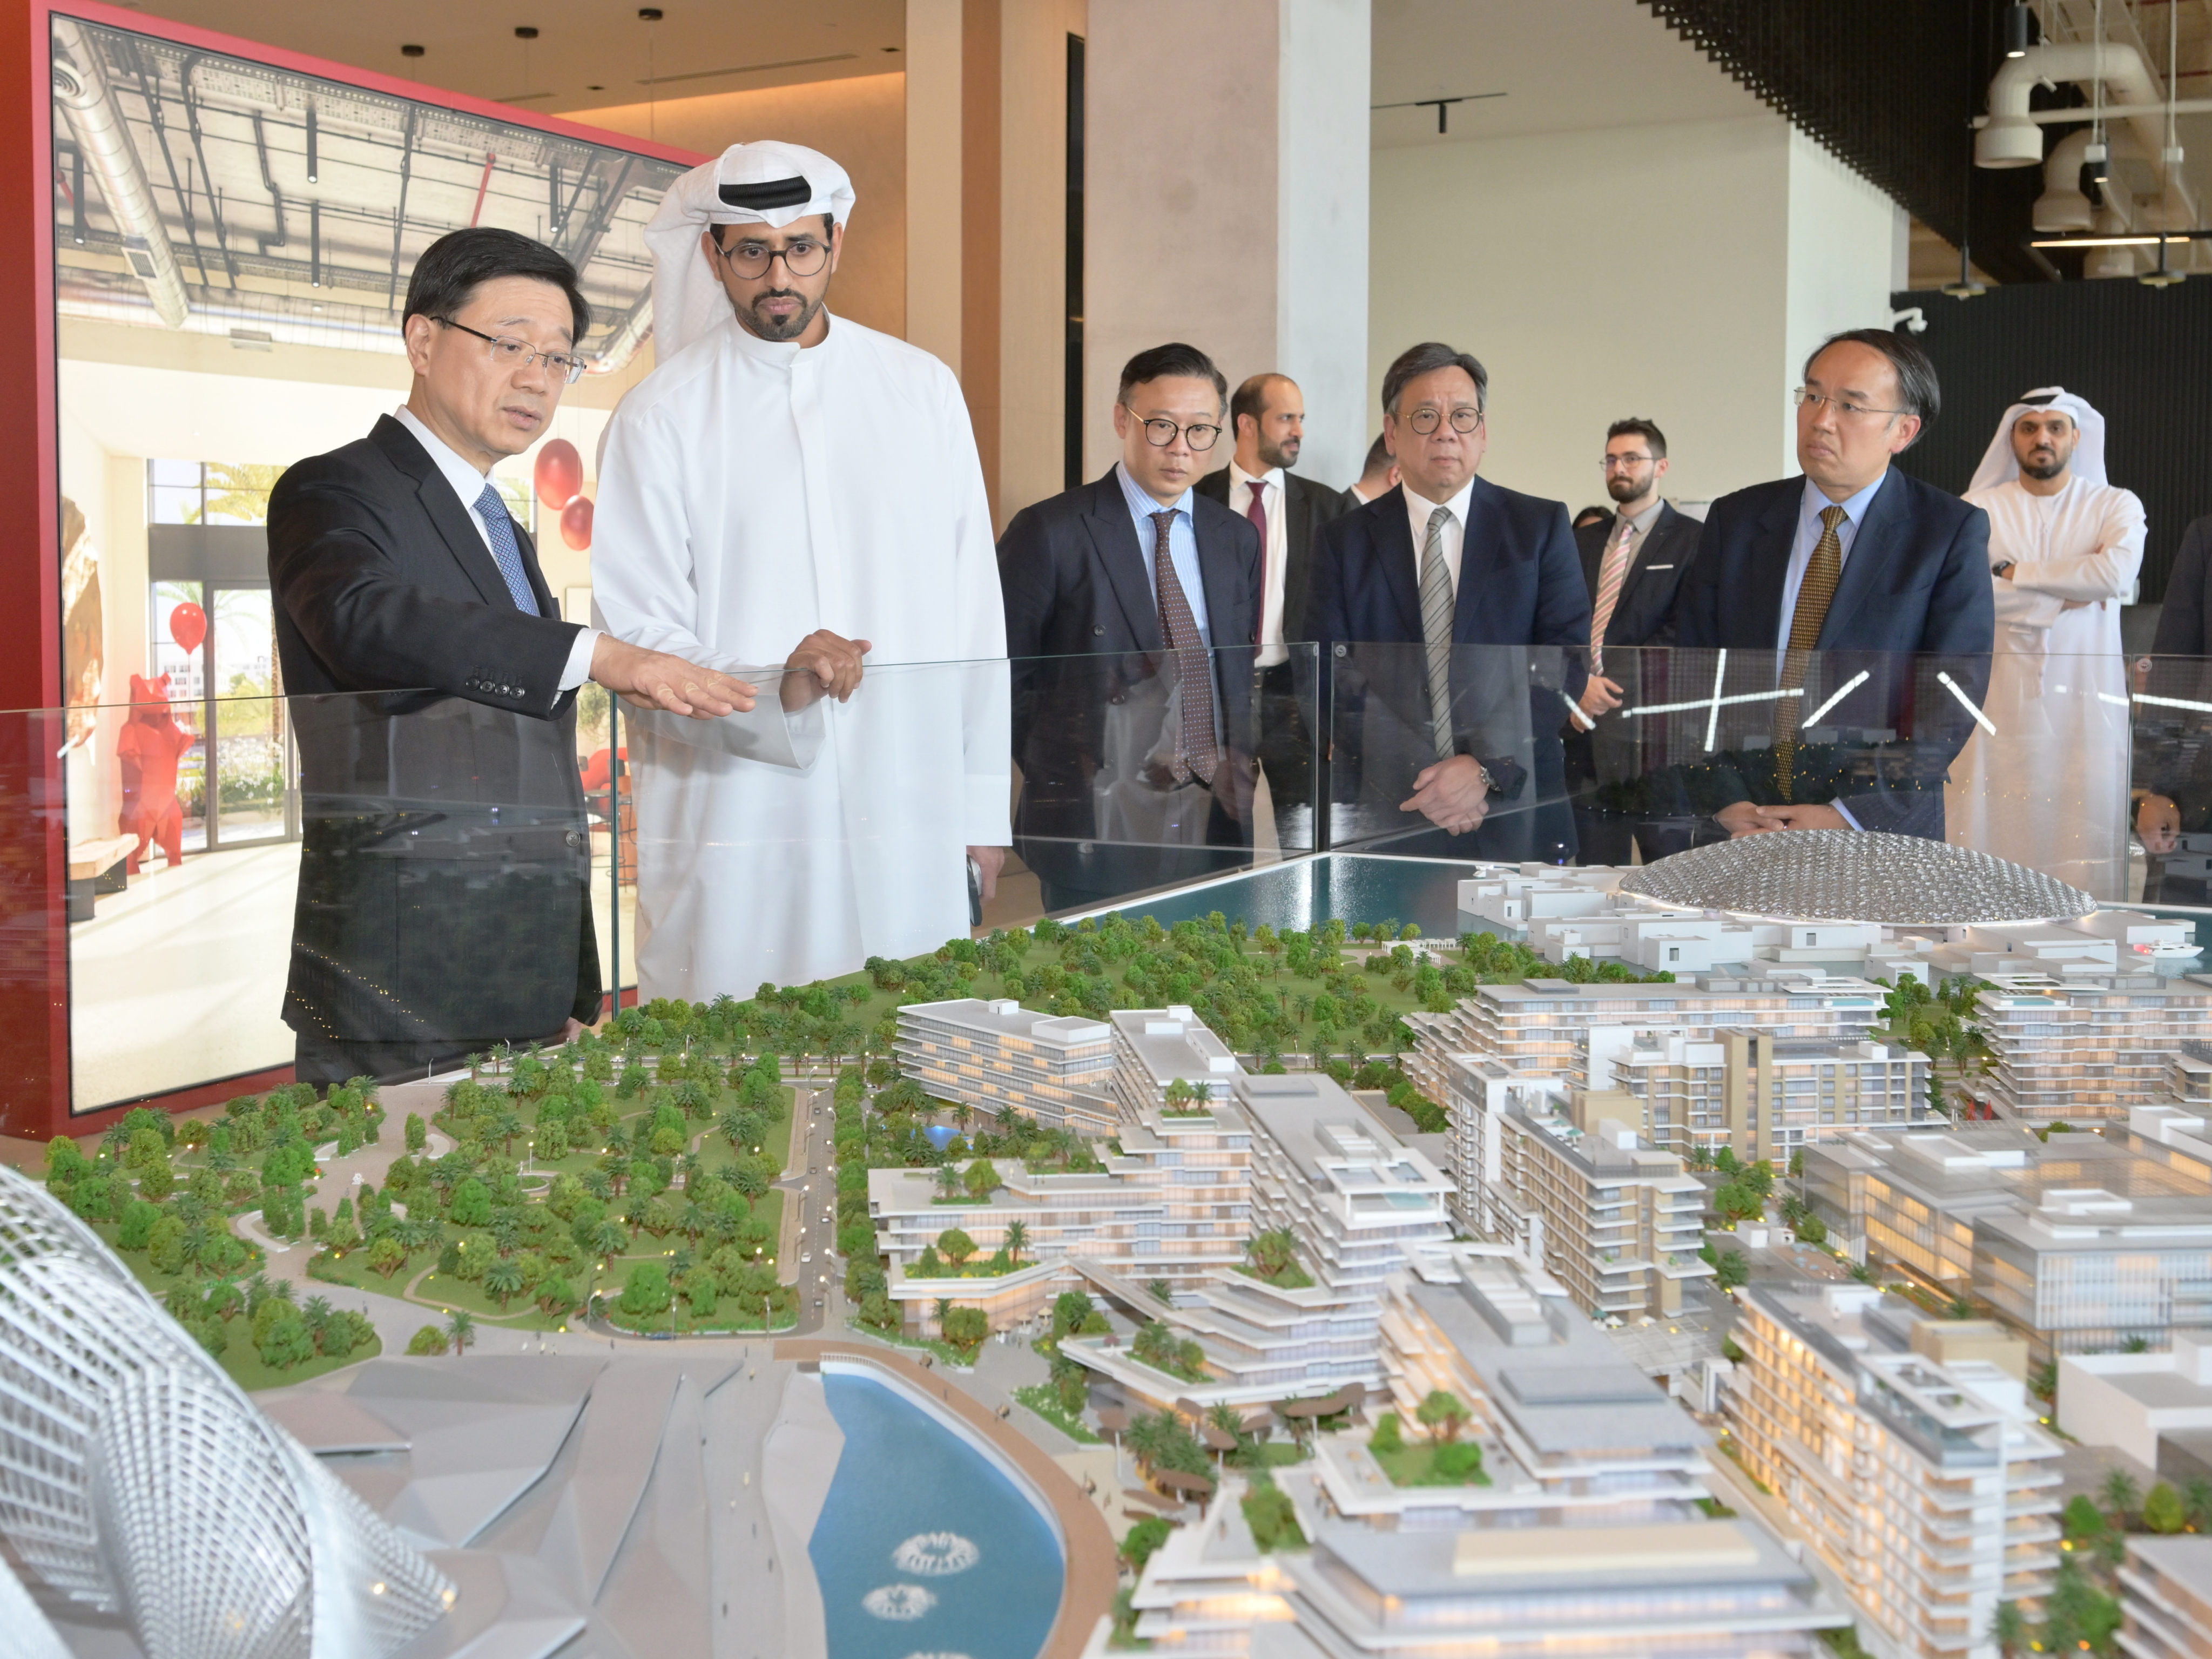 John Lee (left), Hong Kong’s chief executive, during a visit to Abu Dhabi. On his trip to the Middle East in February, Lee told his hosts Hong Kong had “no restrictions whatsoever” in terms of Covid-19-related controls despite an ongoing public mask mandate with a fine for non-compliance. Photo: Handout via Xinhua